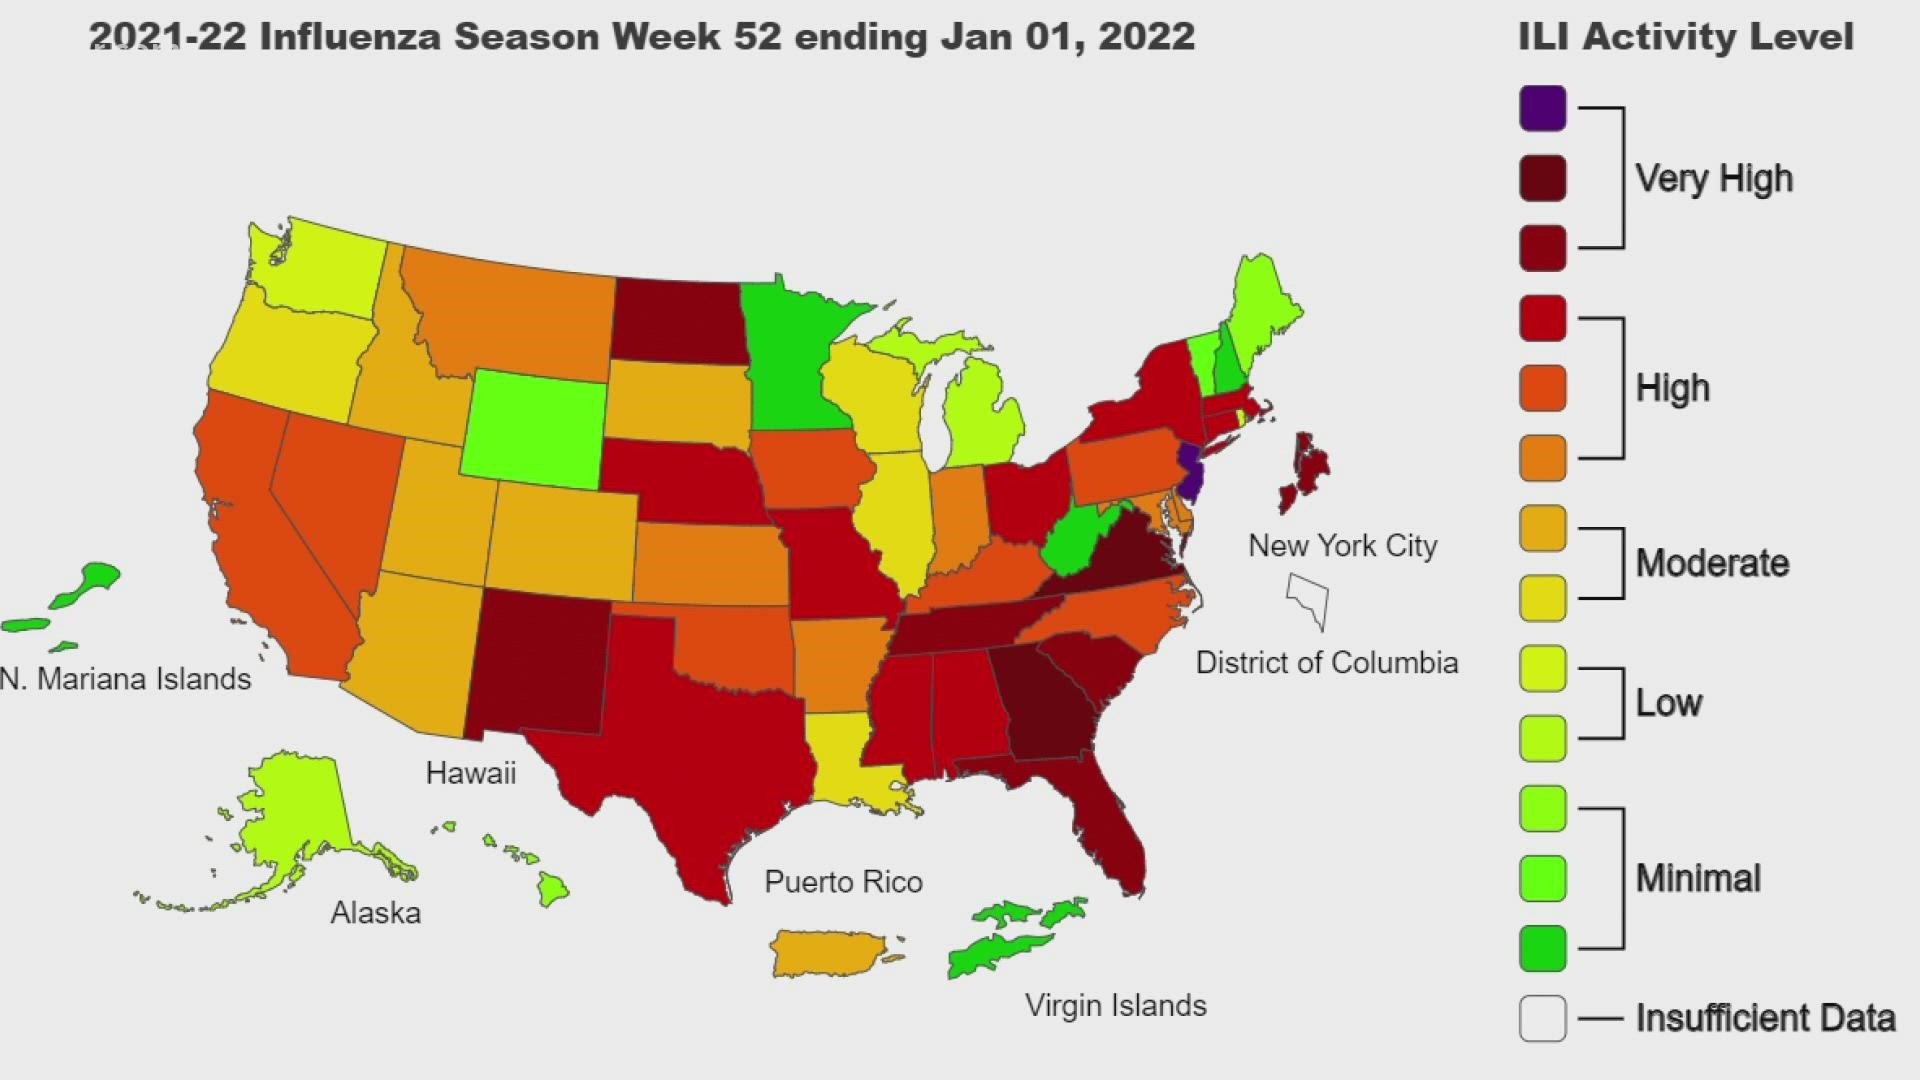 According to Walgreen's flu map, Tennessee is ranked as the number 5 state for flu activity.